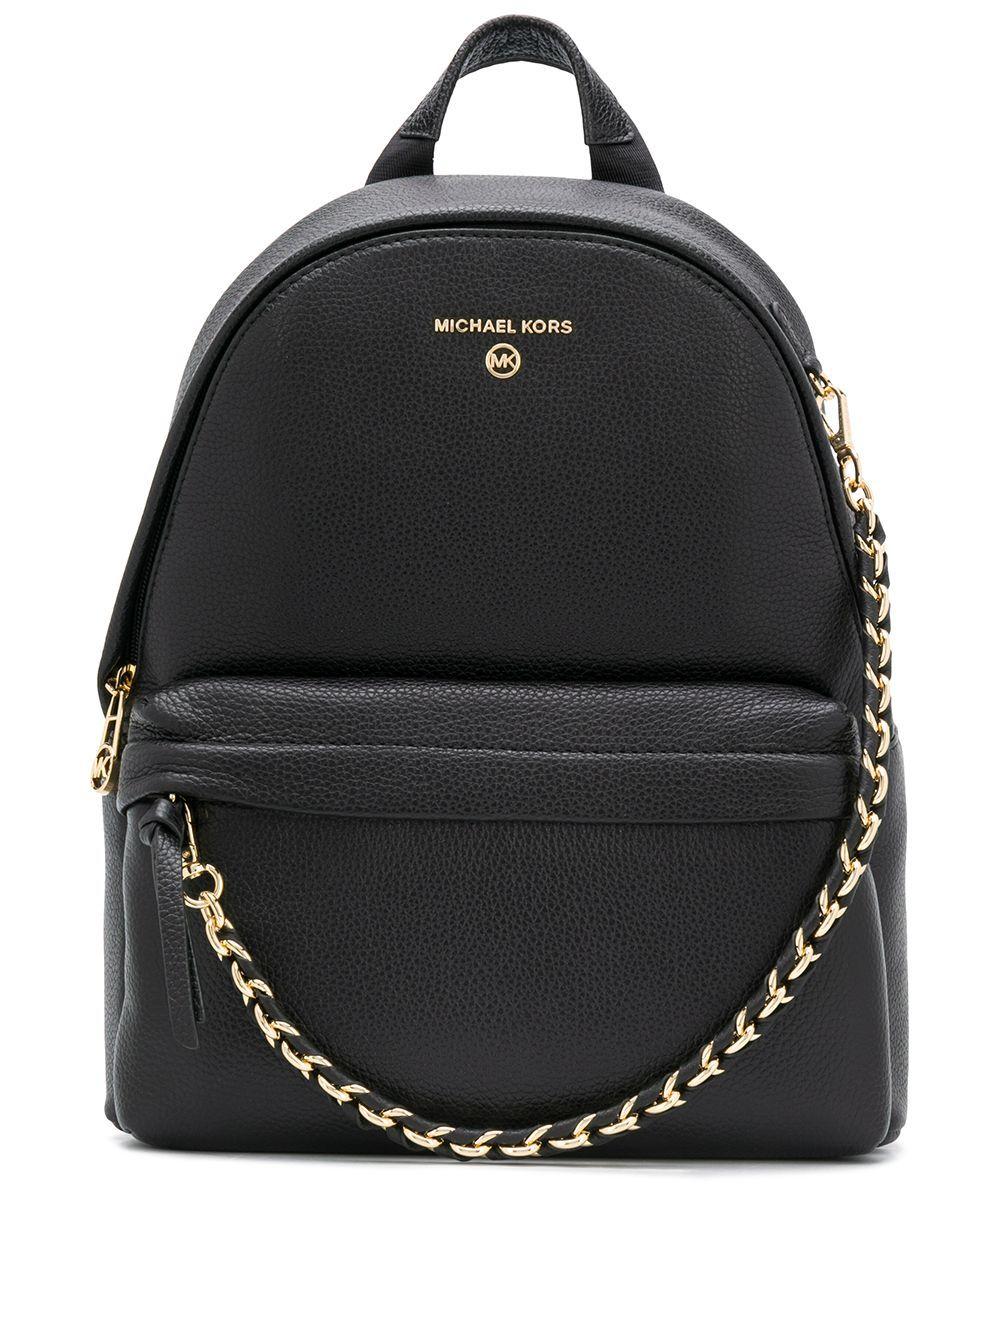 Michael Kors Leather Backpack in Black - Lyst